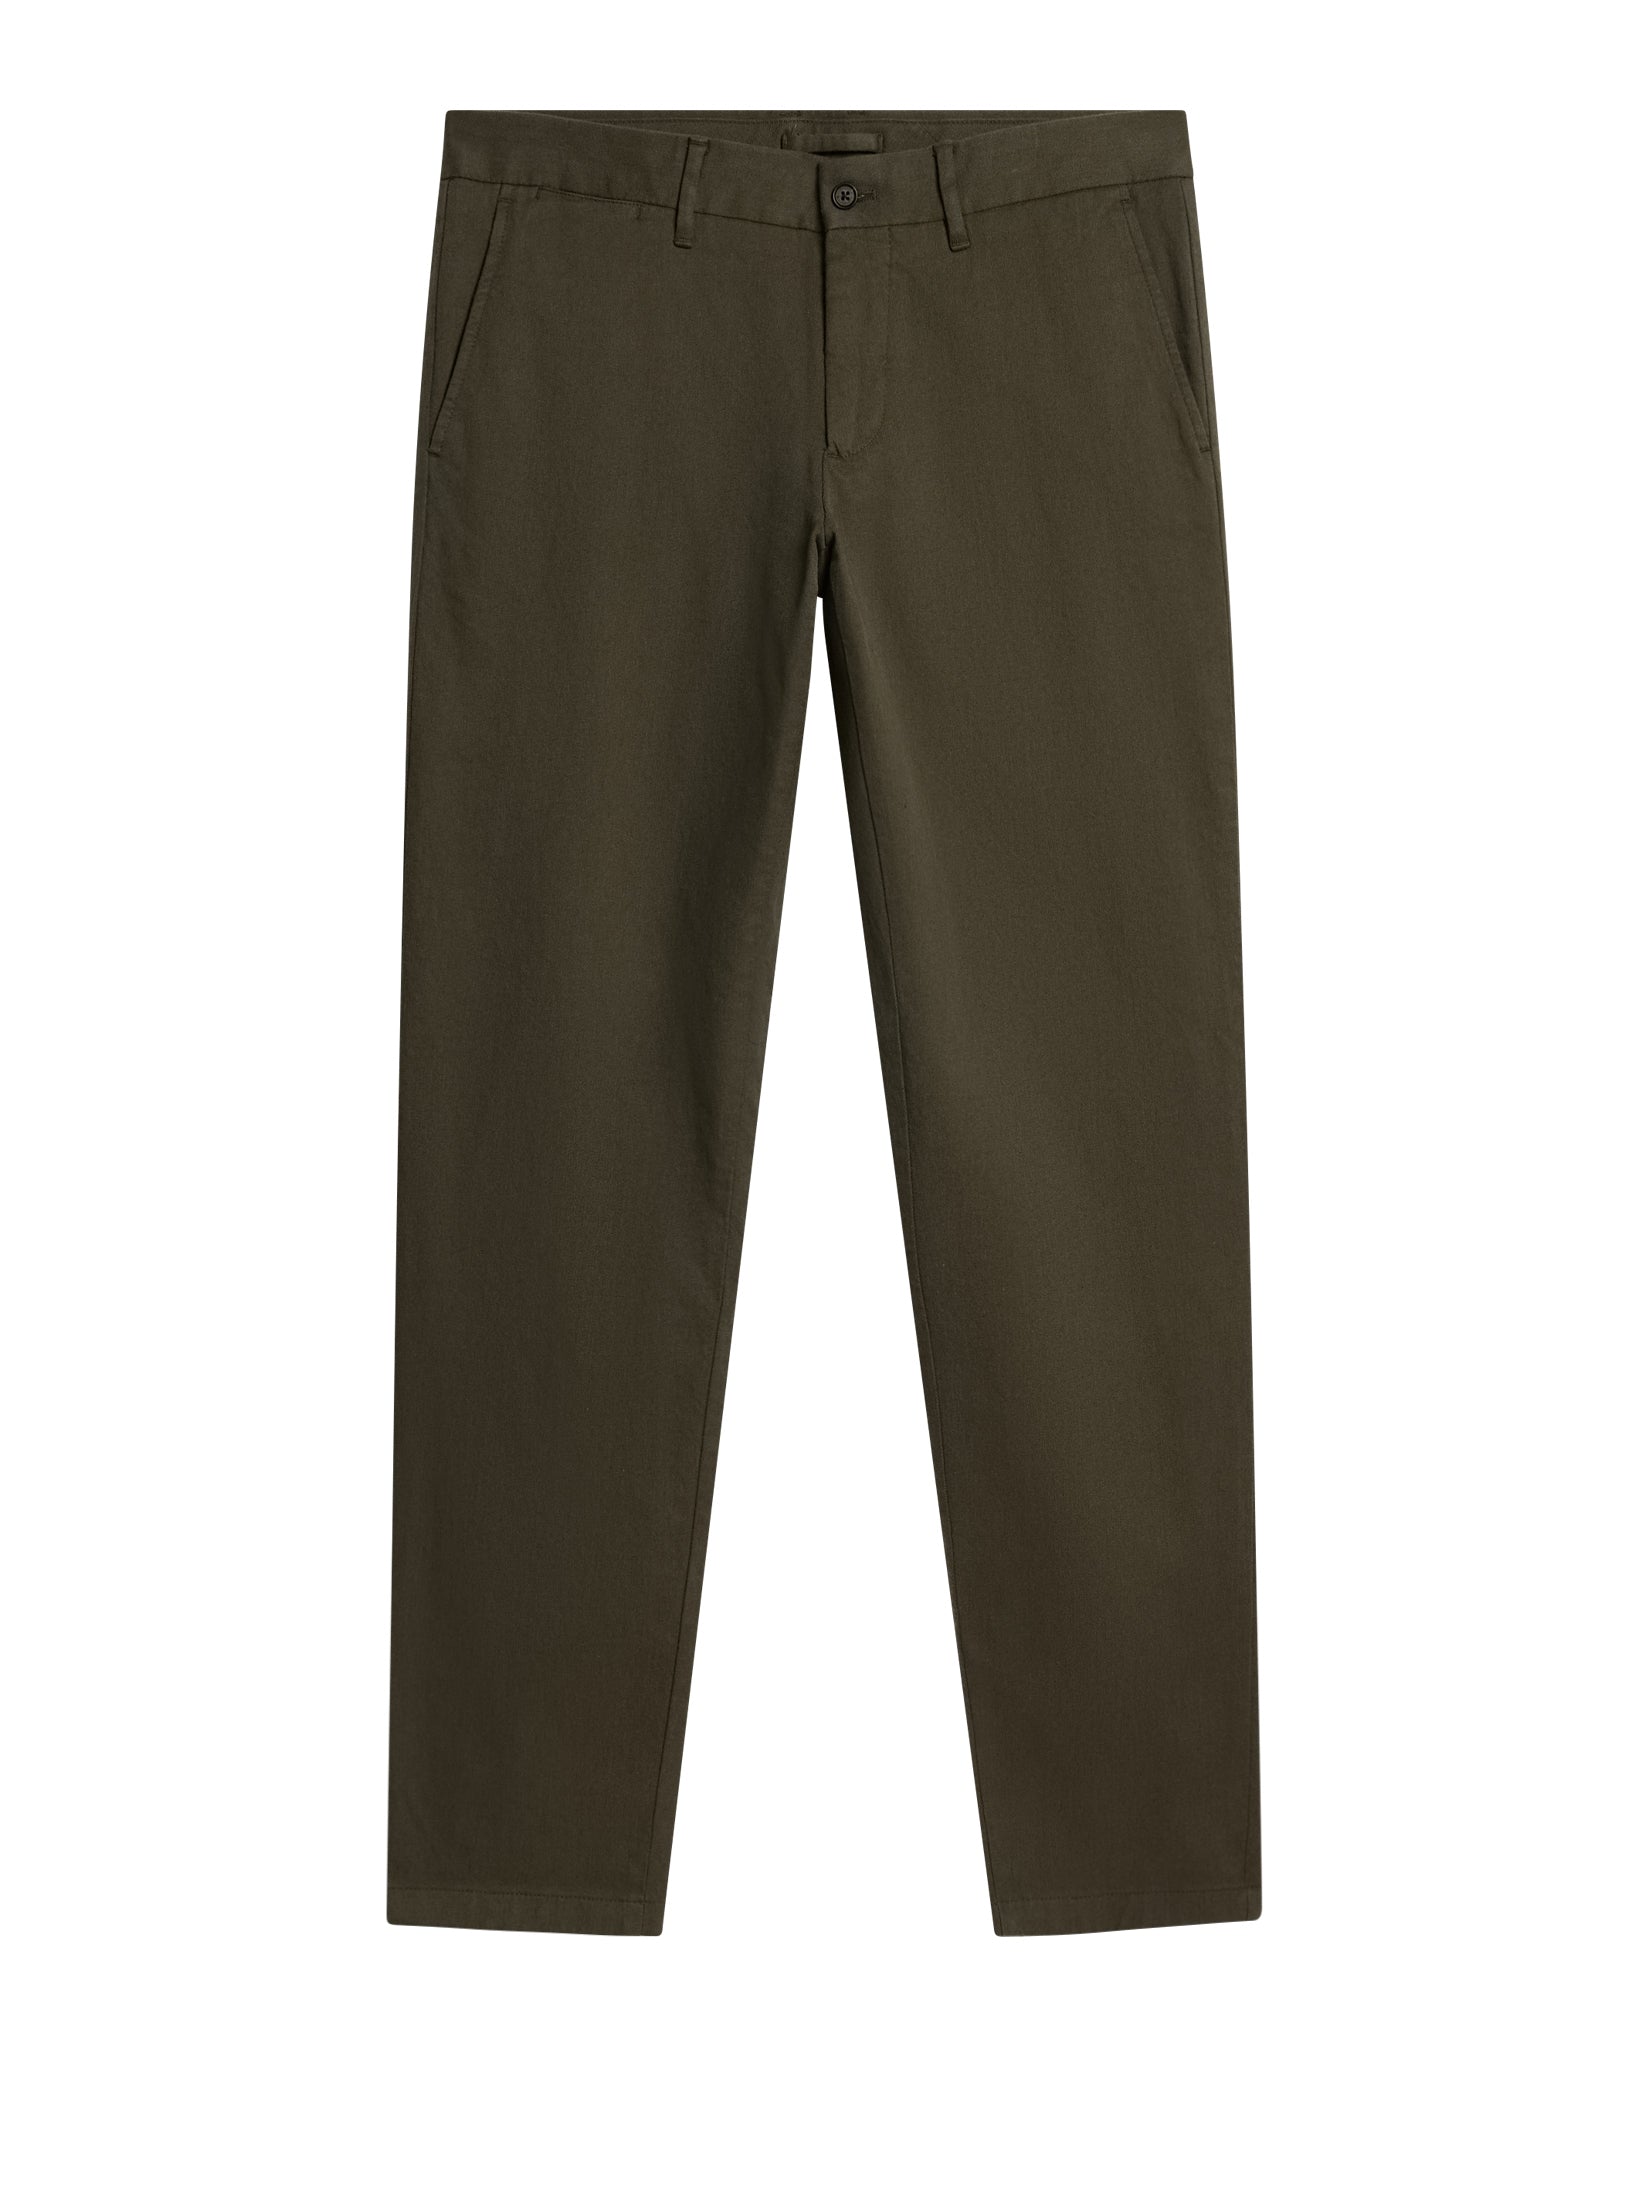 Chaze Flannel Twill Pants / Forest Green – J.Lindeberg